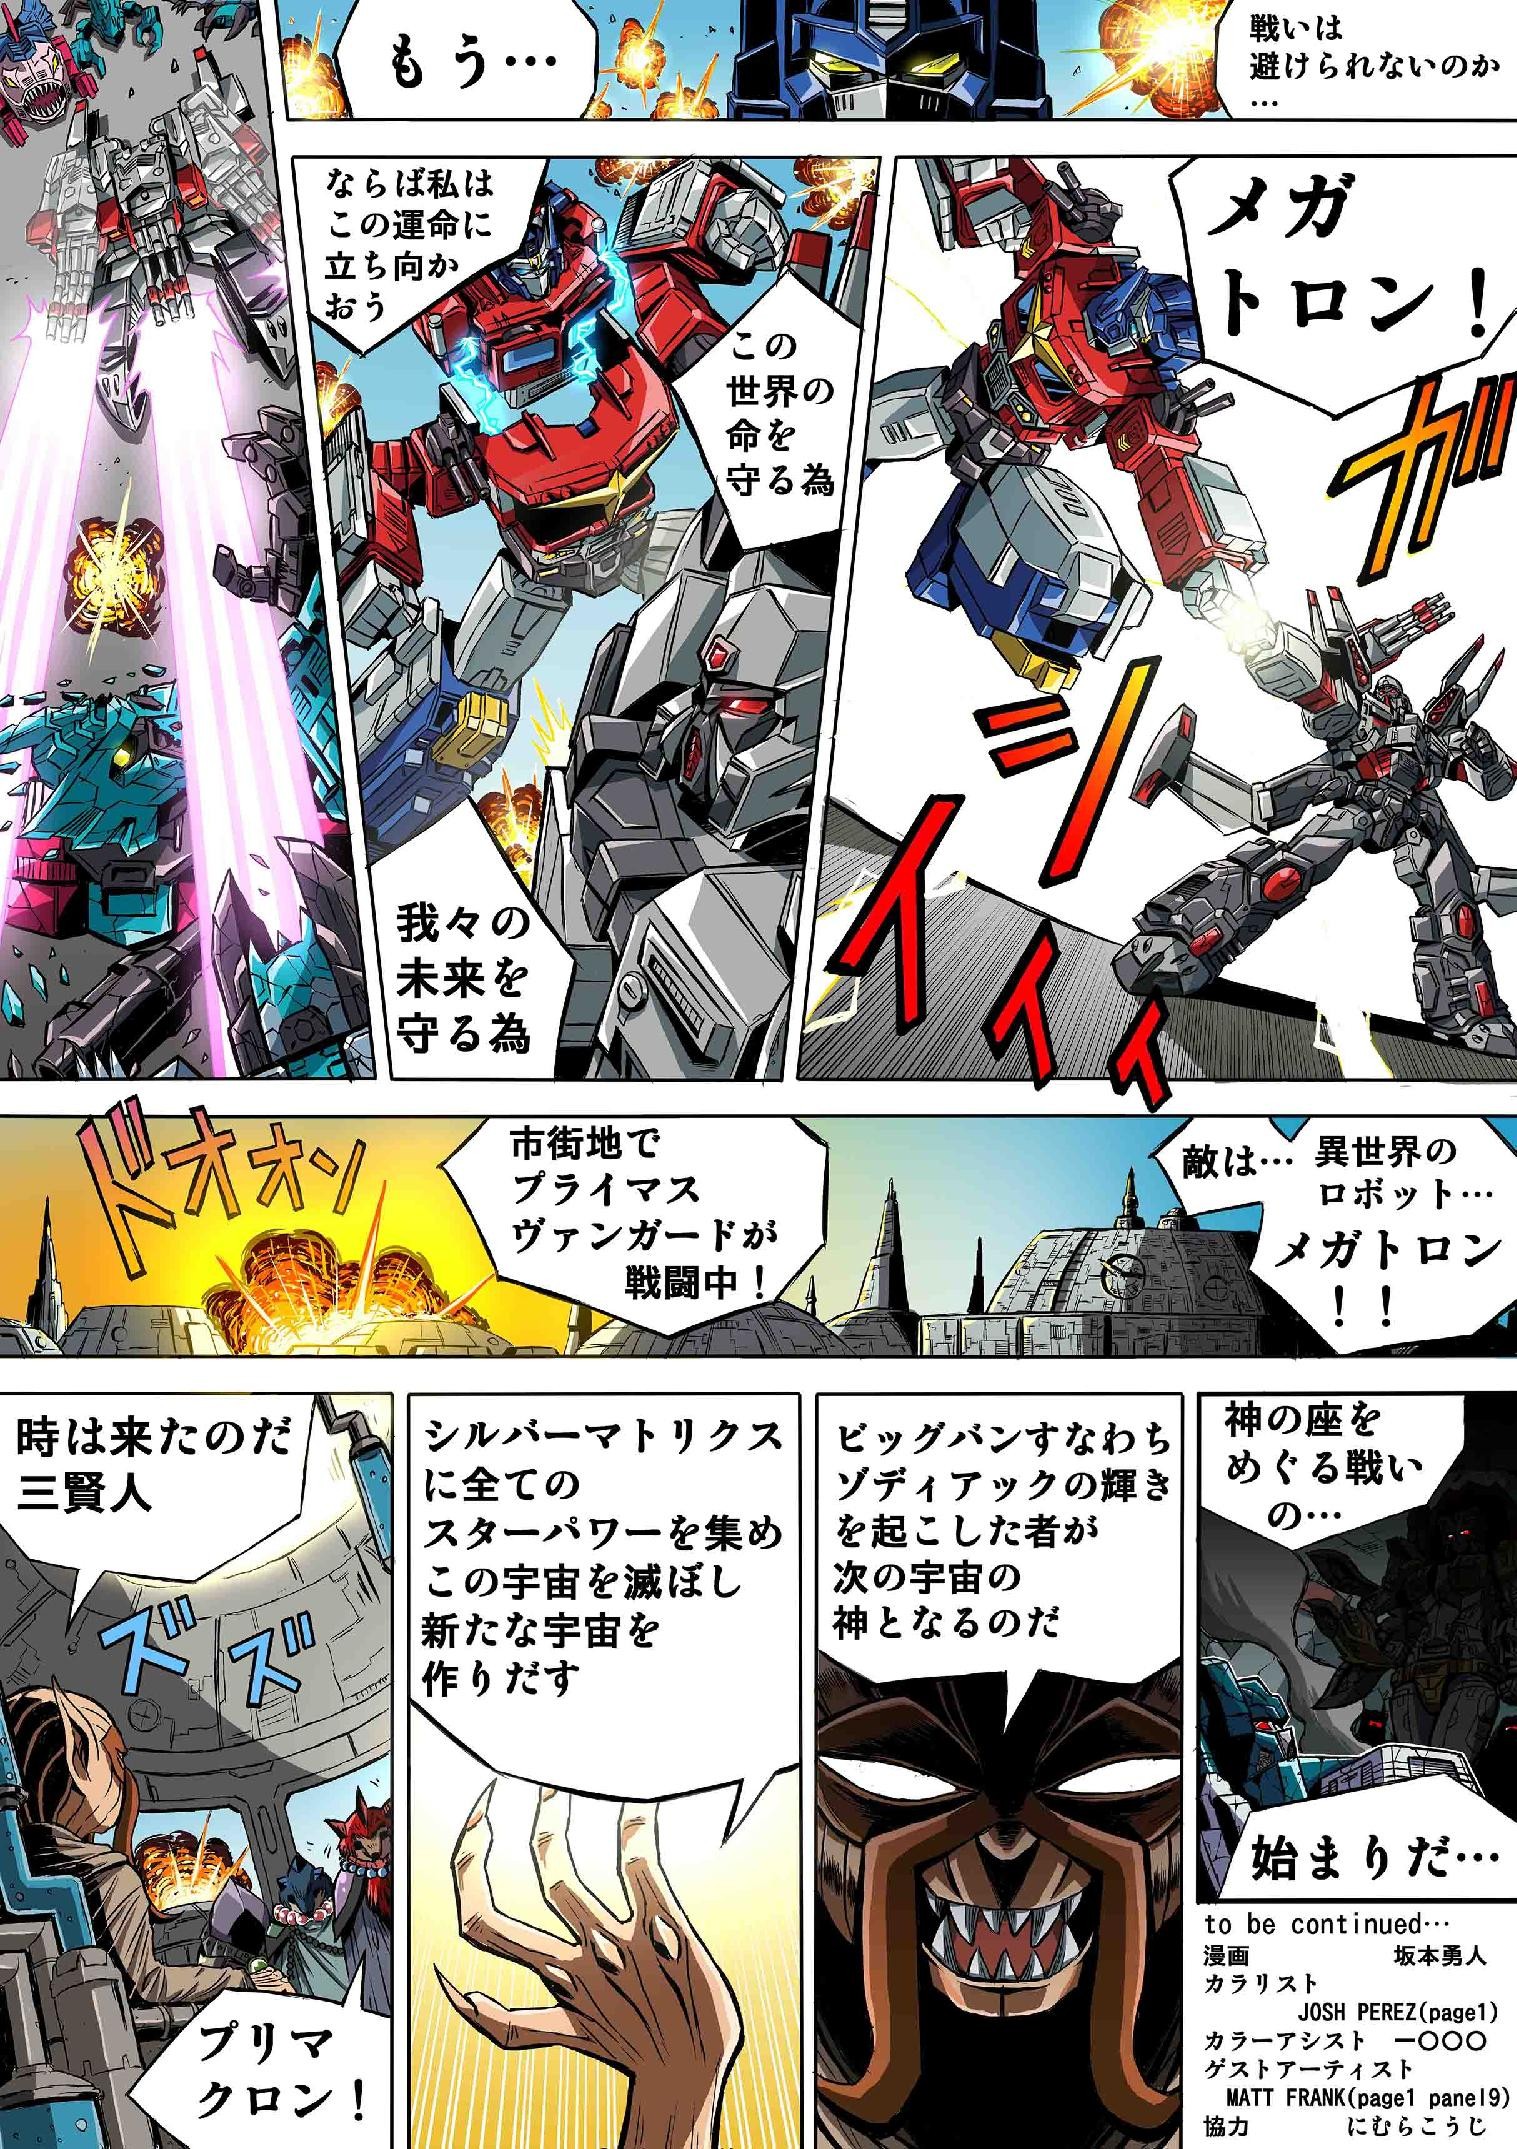 Transformers News: Another Manga Installment Posted Online for Selects Super Megatron